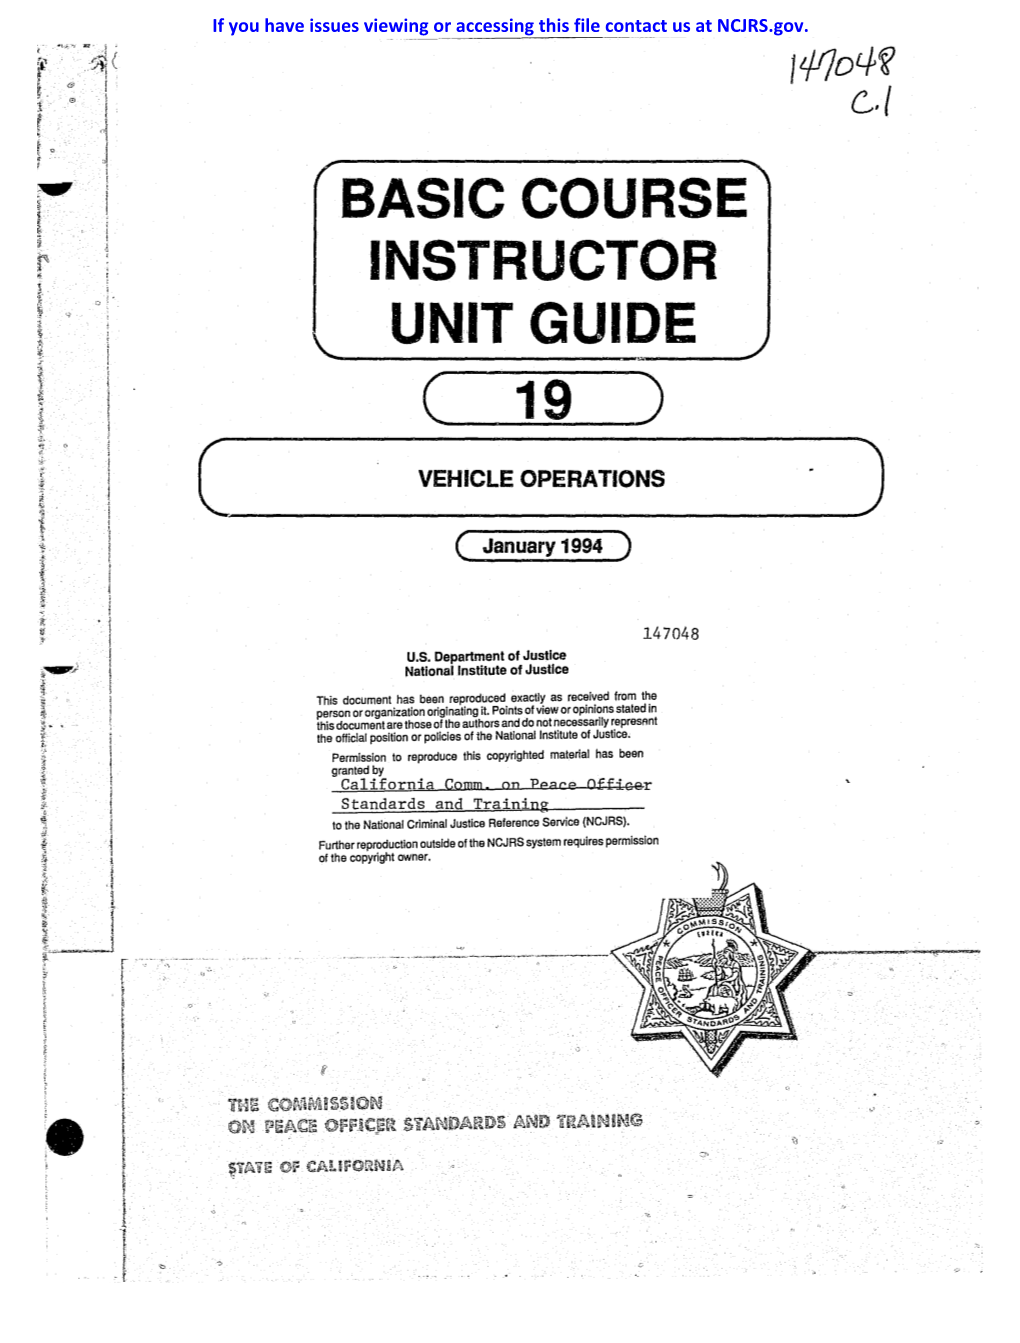 Basic Course Instructor Unit Guide